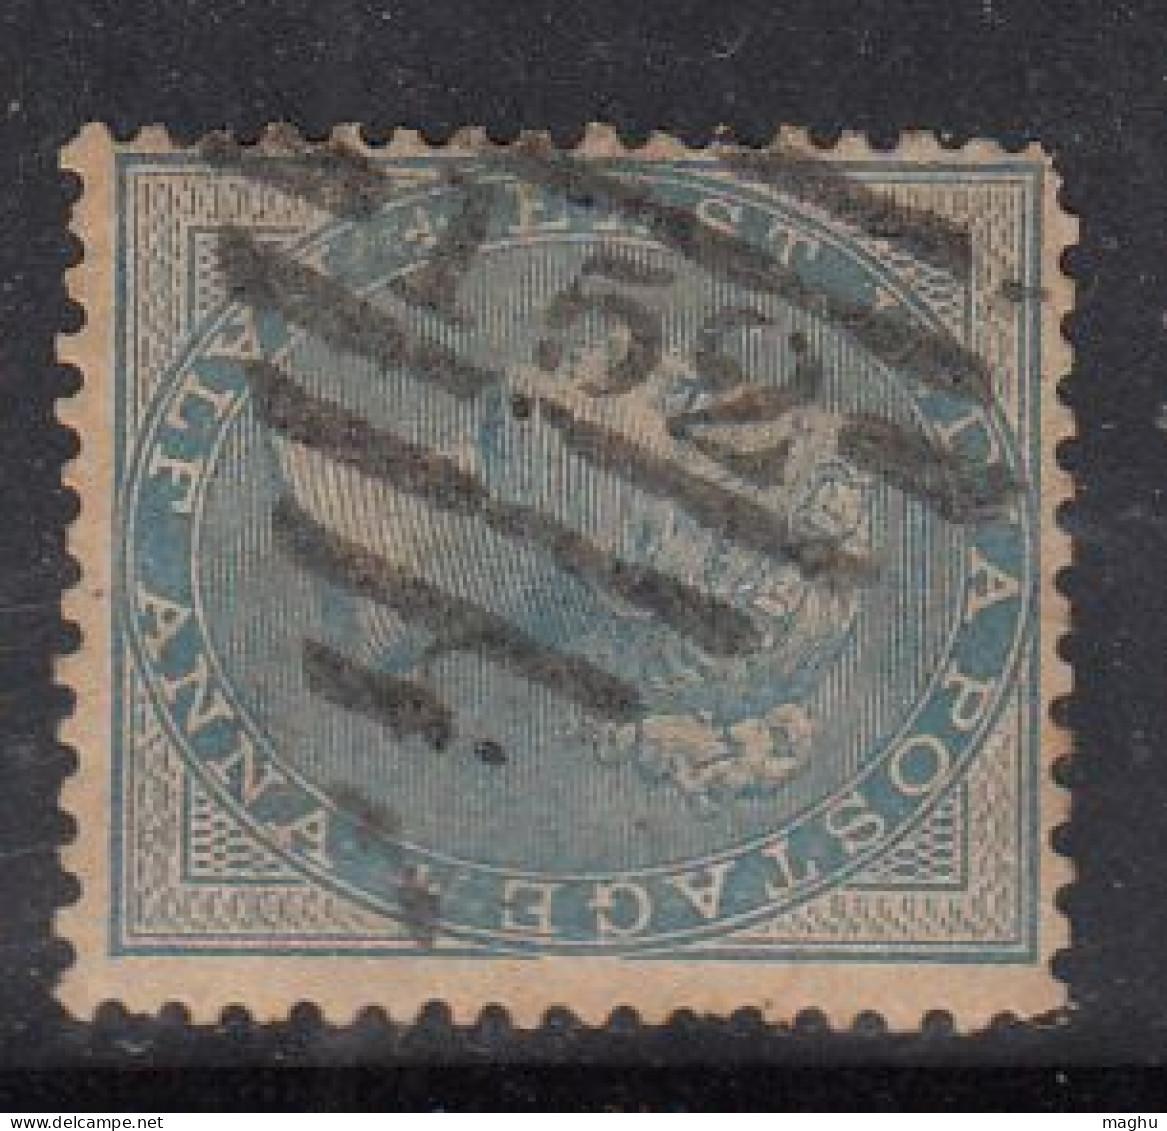 152 Tranquebar Madras Circle Cooper Renouf 12a British East India Used Early Indian Cancellations Danish Denmark Norway - 1854 Britse Indische Compagnie